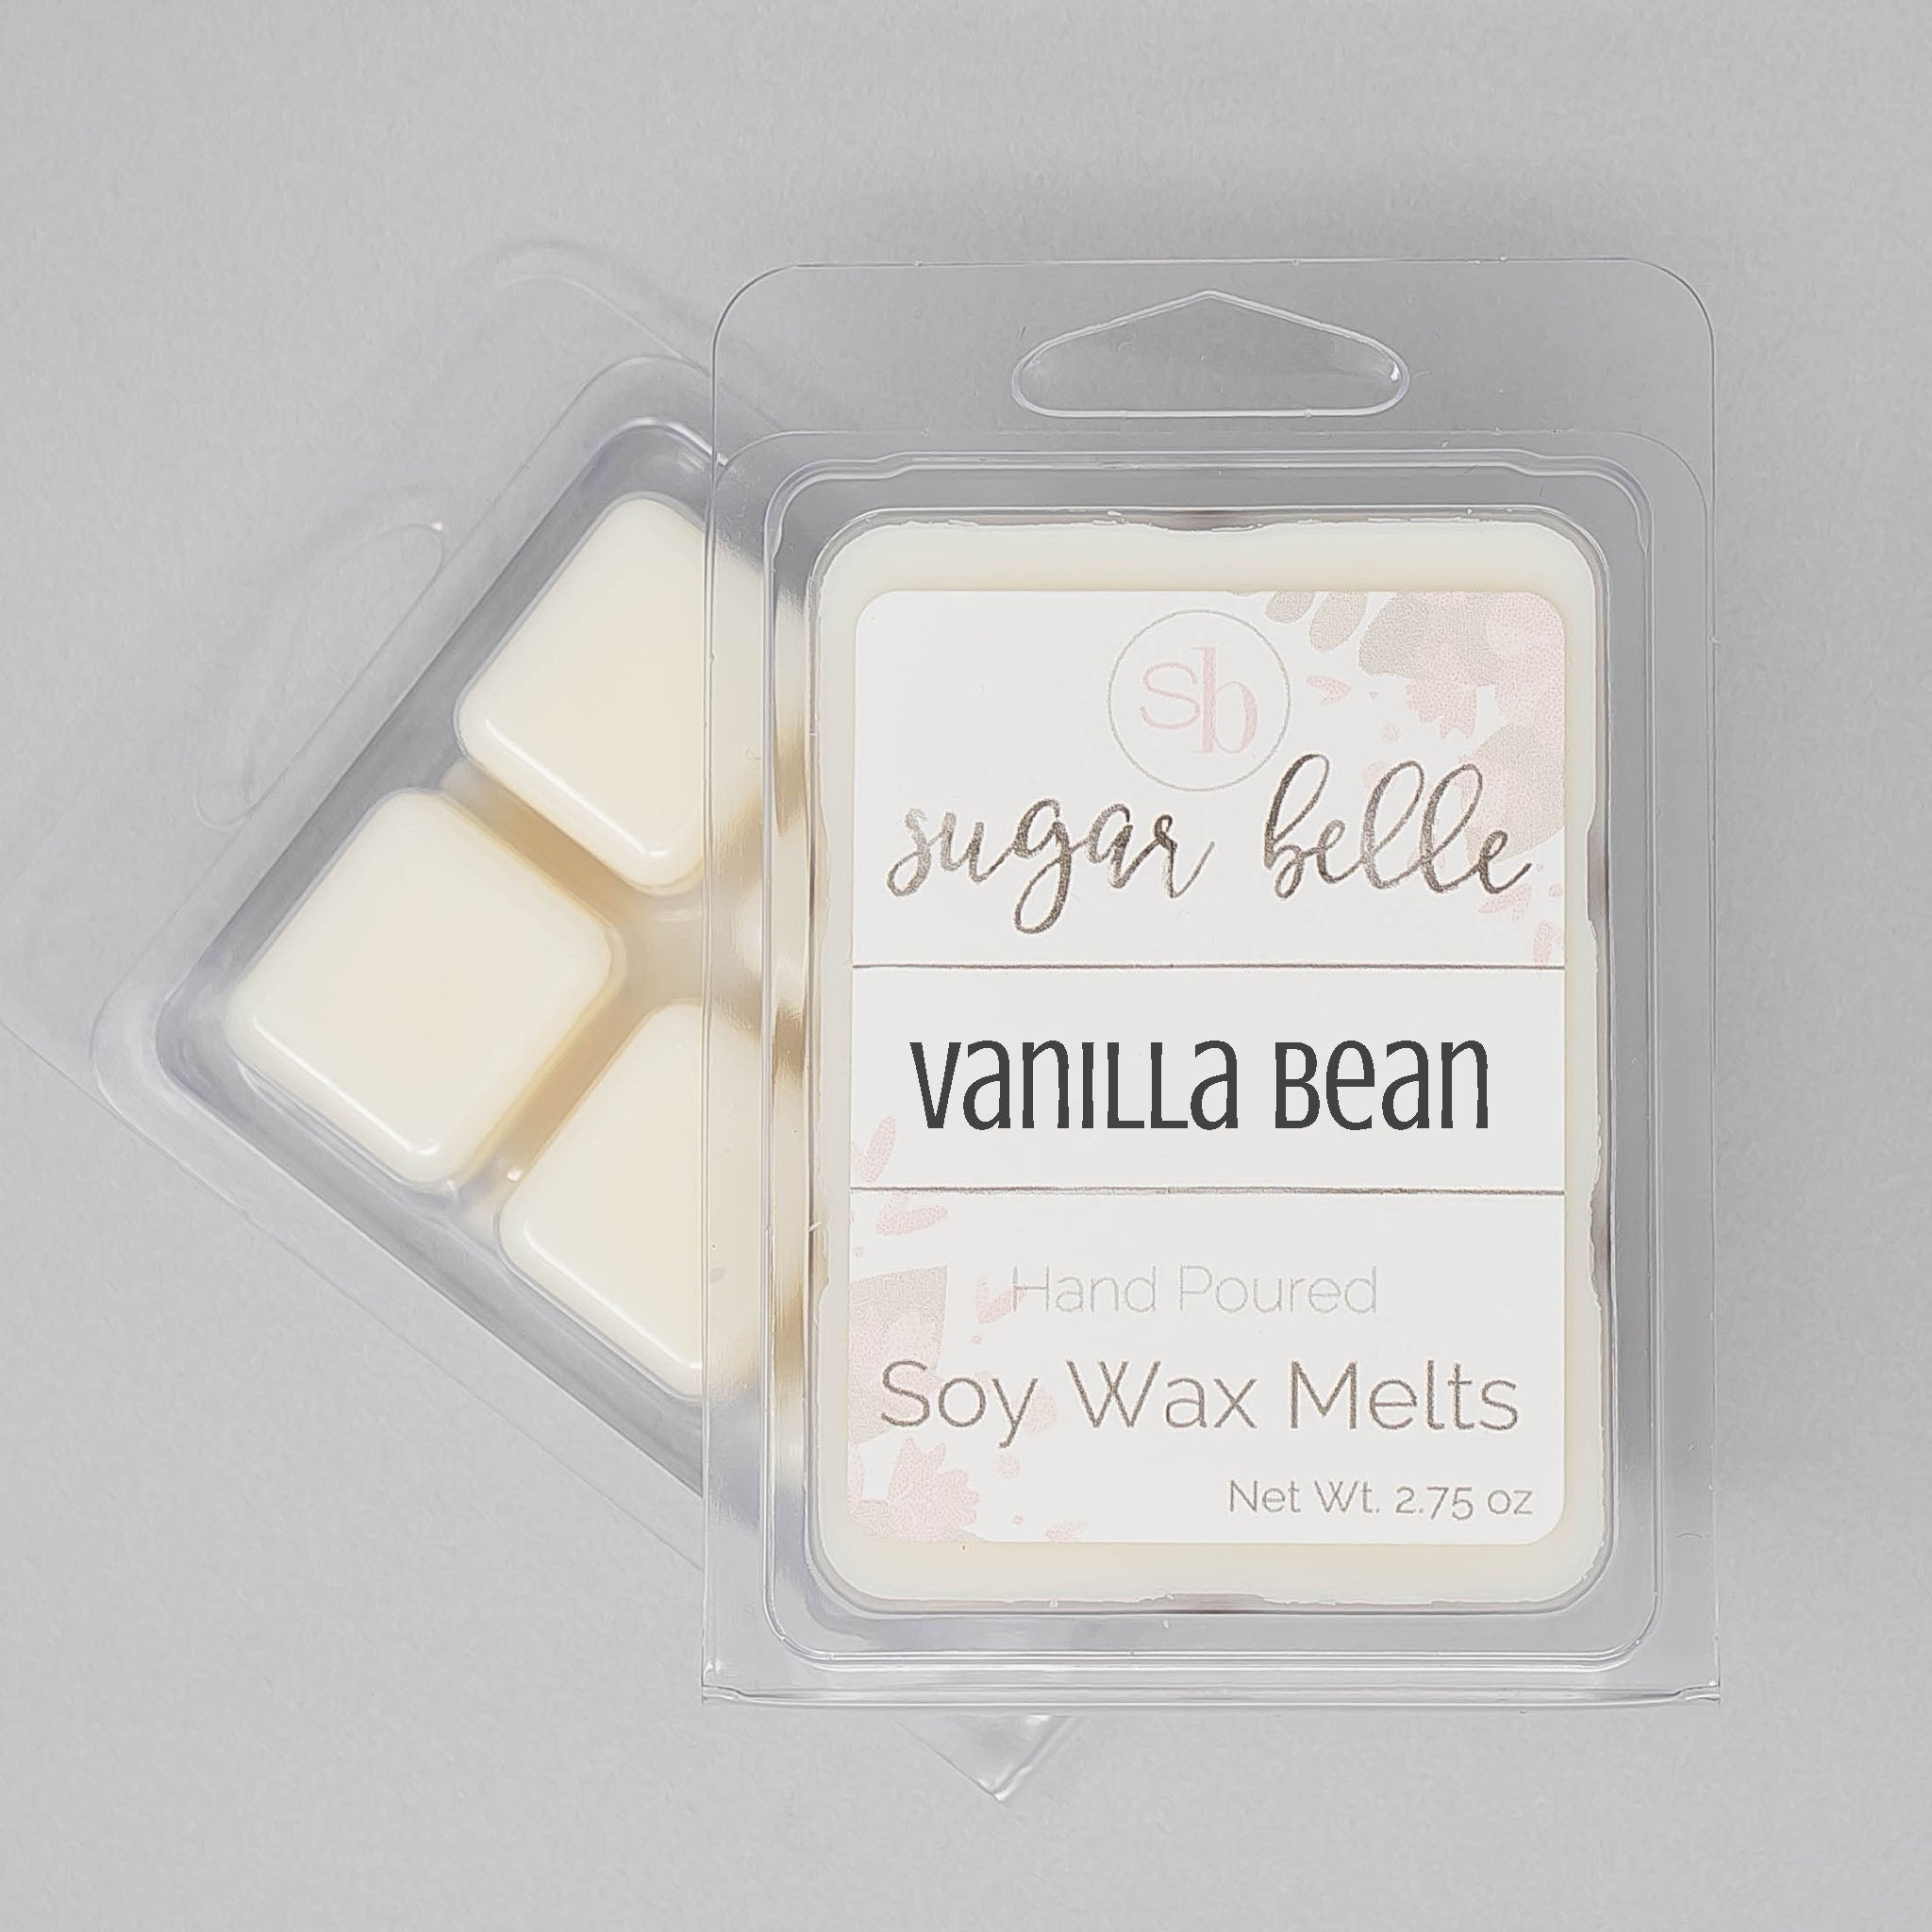 Vanilla Bean Scented Soy Wax Melts – Sugar Belle Candles